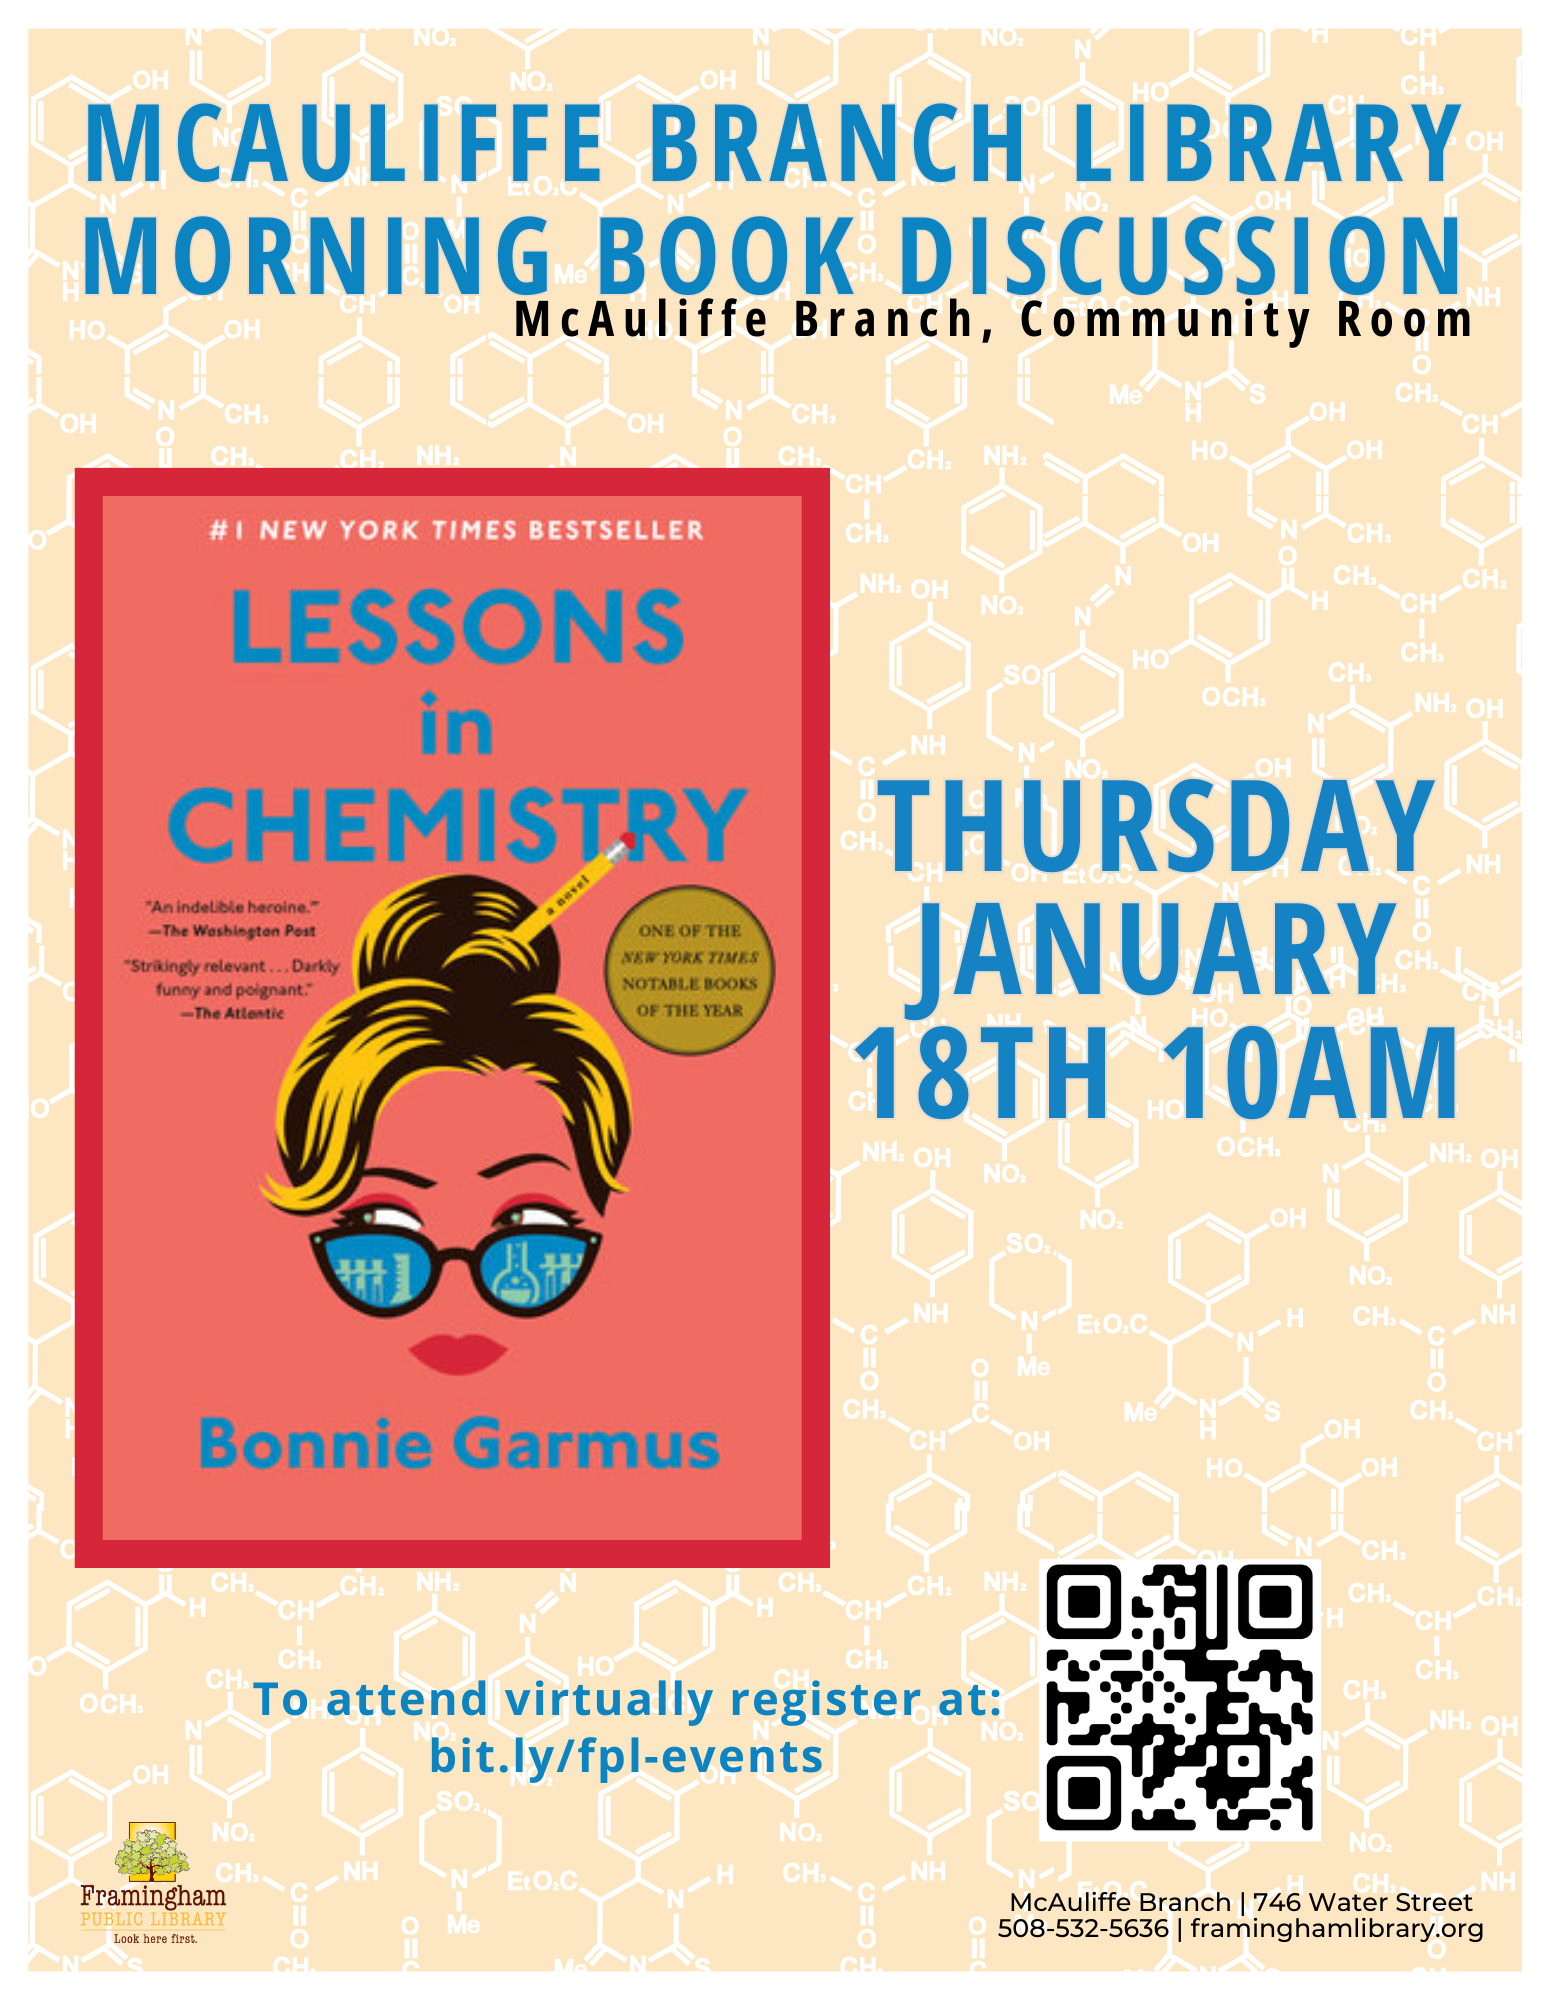 McAuliffe Morning Book Discussion: “Lessons in Chemistry” by Bonnie Garmus thumbnail Photo